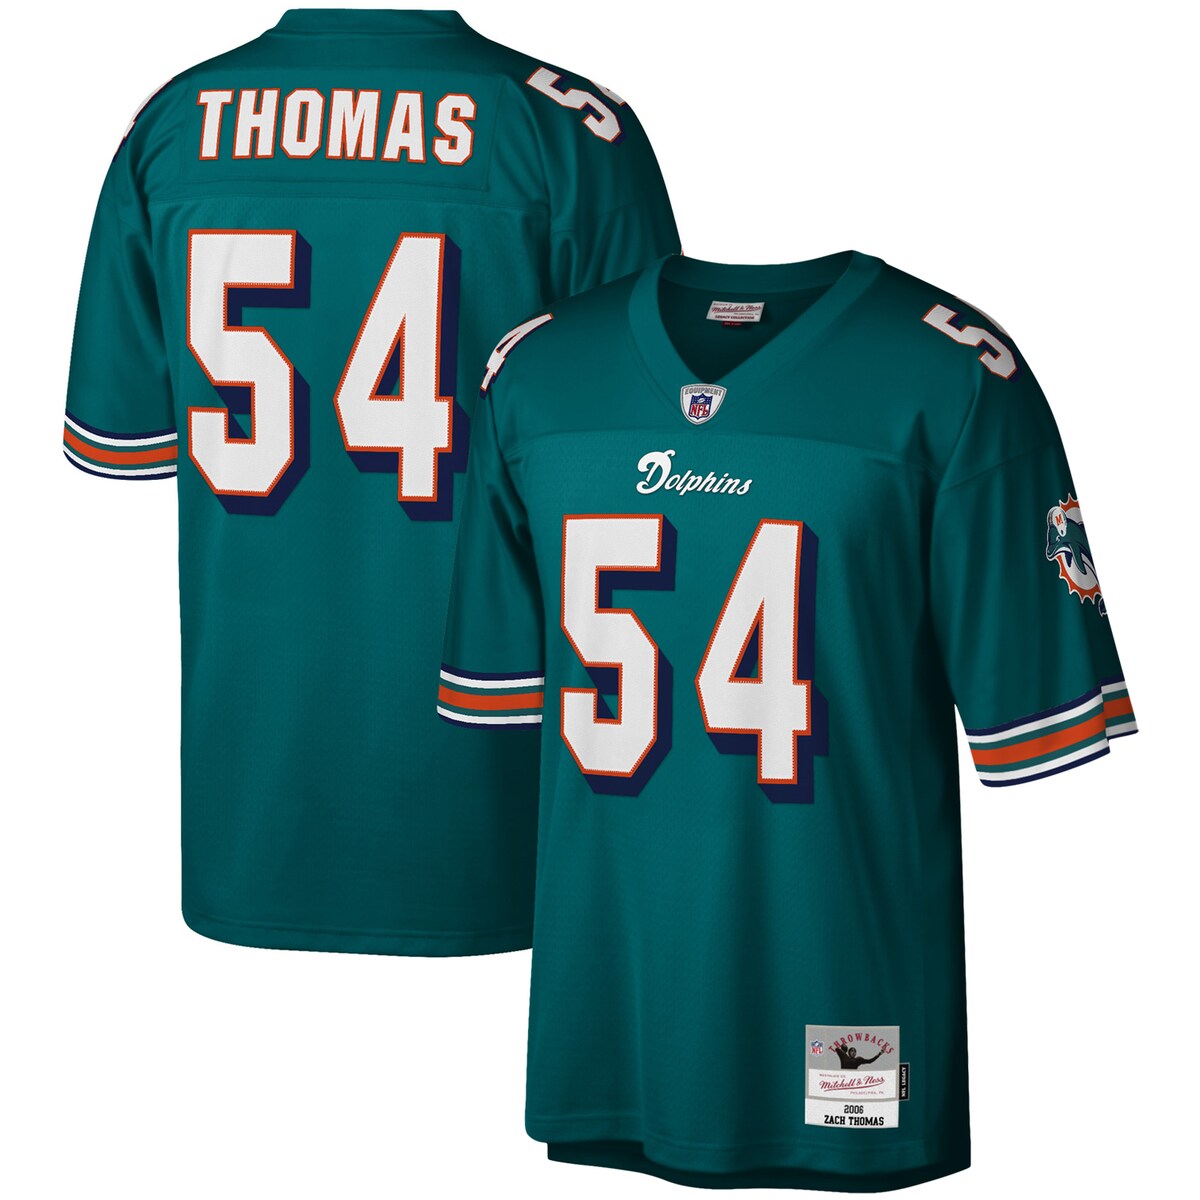 You're a massive Miami Dolphins fan and also loved watching Zach Thomas play. Now you can show off your fandom for both when you get this Zach Thomas Miami Dolphins Legacy replica jersey from Mitchell & Ness. It features distinctive throwback Miami Dolphins graphics on the chest and back, perfect for wearing at a home game. By wearing this jersey, you'll be able to feel like you're reliving some of the great plays that Zach Thomas accomplished to lead the Miami Dolphins to glory.Officially licensedReplicaEmbroidered twill graphicsFabric applique sewn onMaterial: 100% PolyesterSublimated rib-knit sleeve insertsShort sleevesWoven tags at bottom hemMachine wash, line dryImportedMesh fabricBrand: Mitchell & NessSide splits at waist hemV-neckEmbroidered NFL Shield at collar